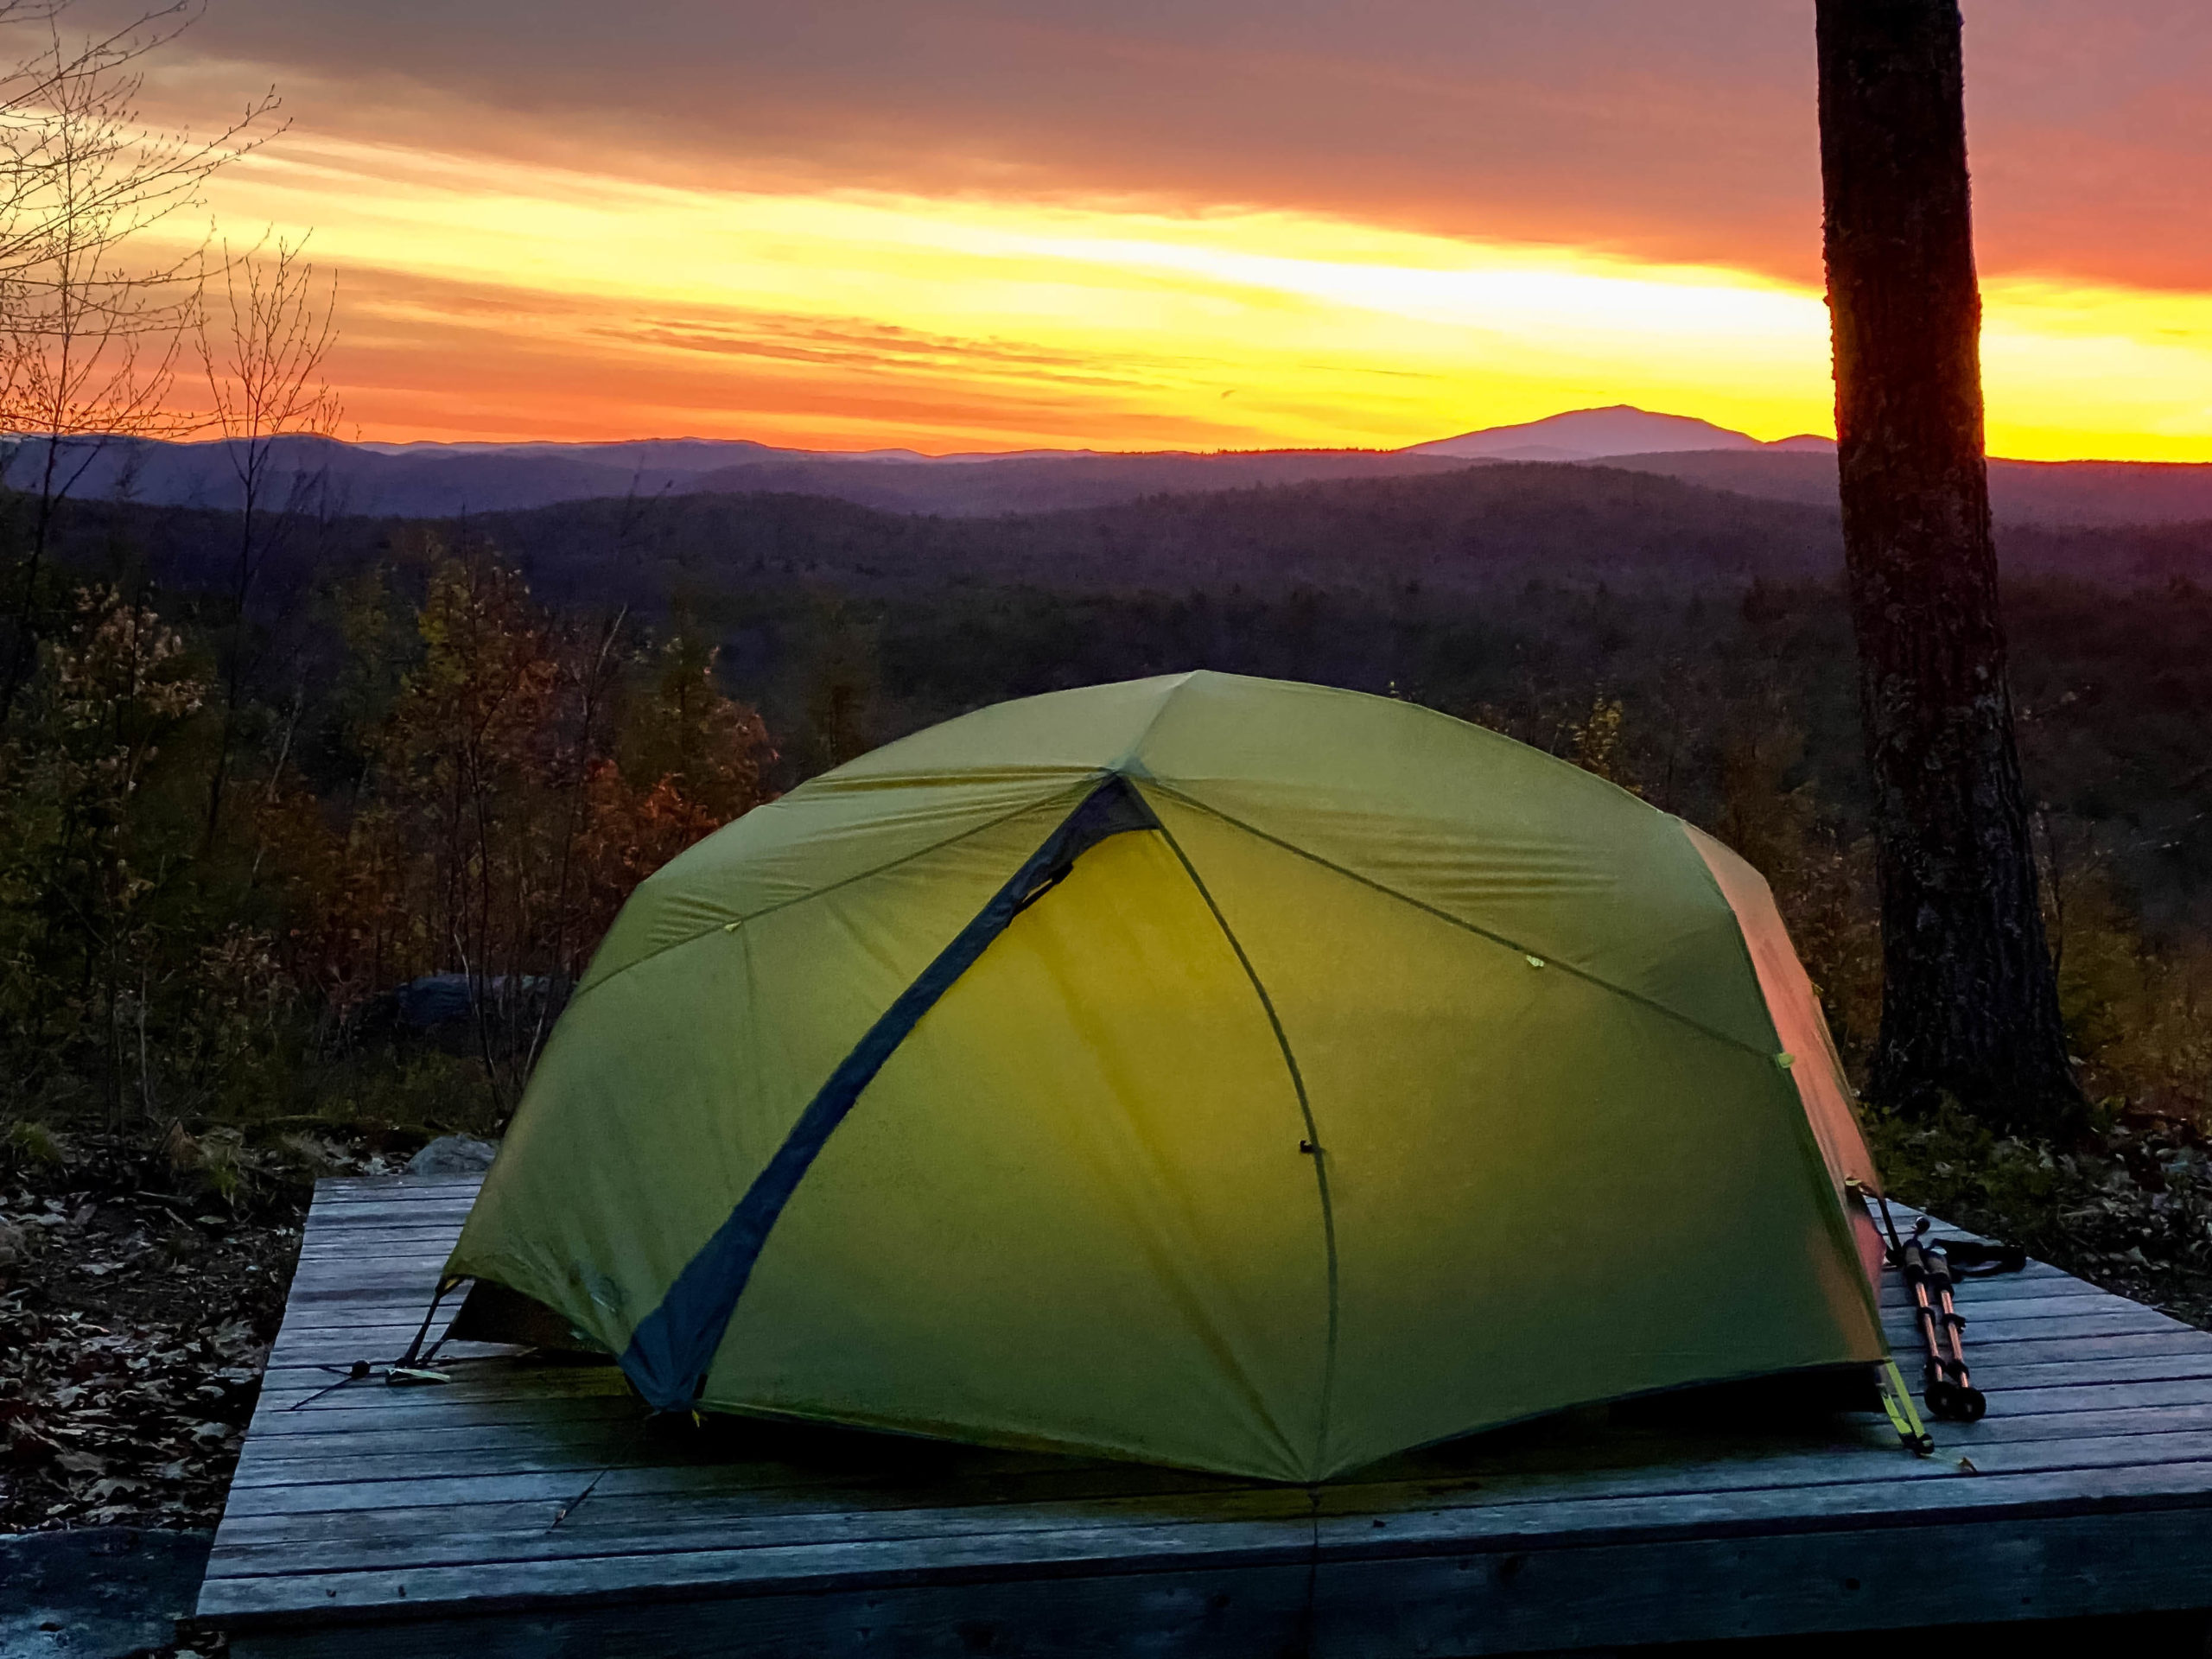 Trip report: A night at the New England Trail’s Richardson Overlook